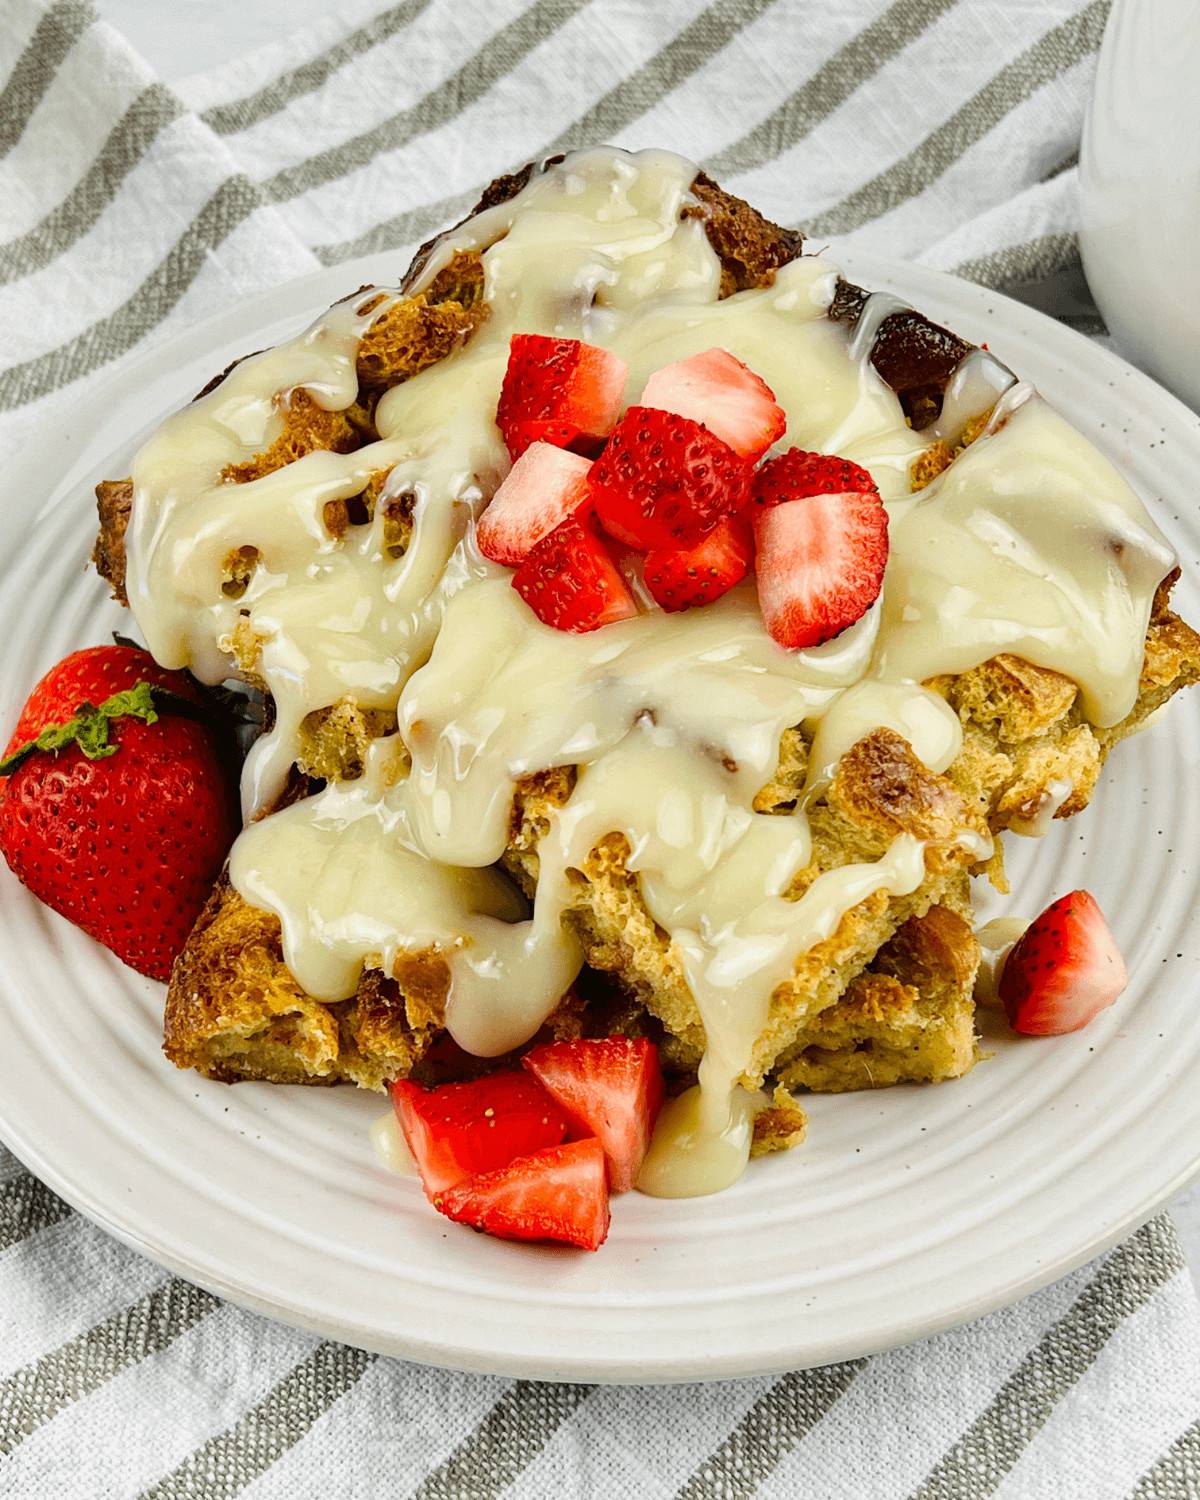 A plate of bread pudding topped with vanilla glaze and fresh strawberries.